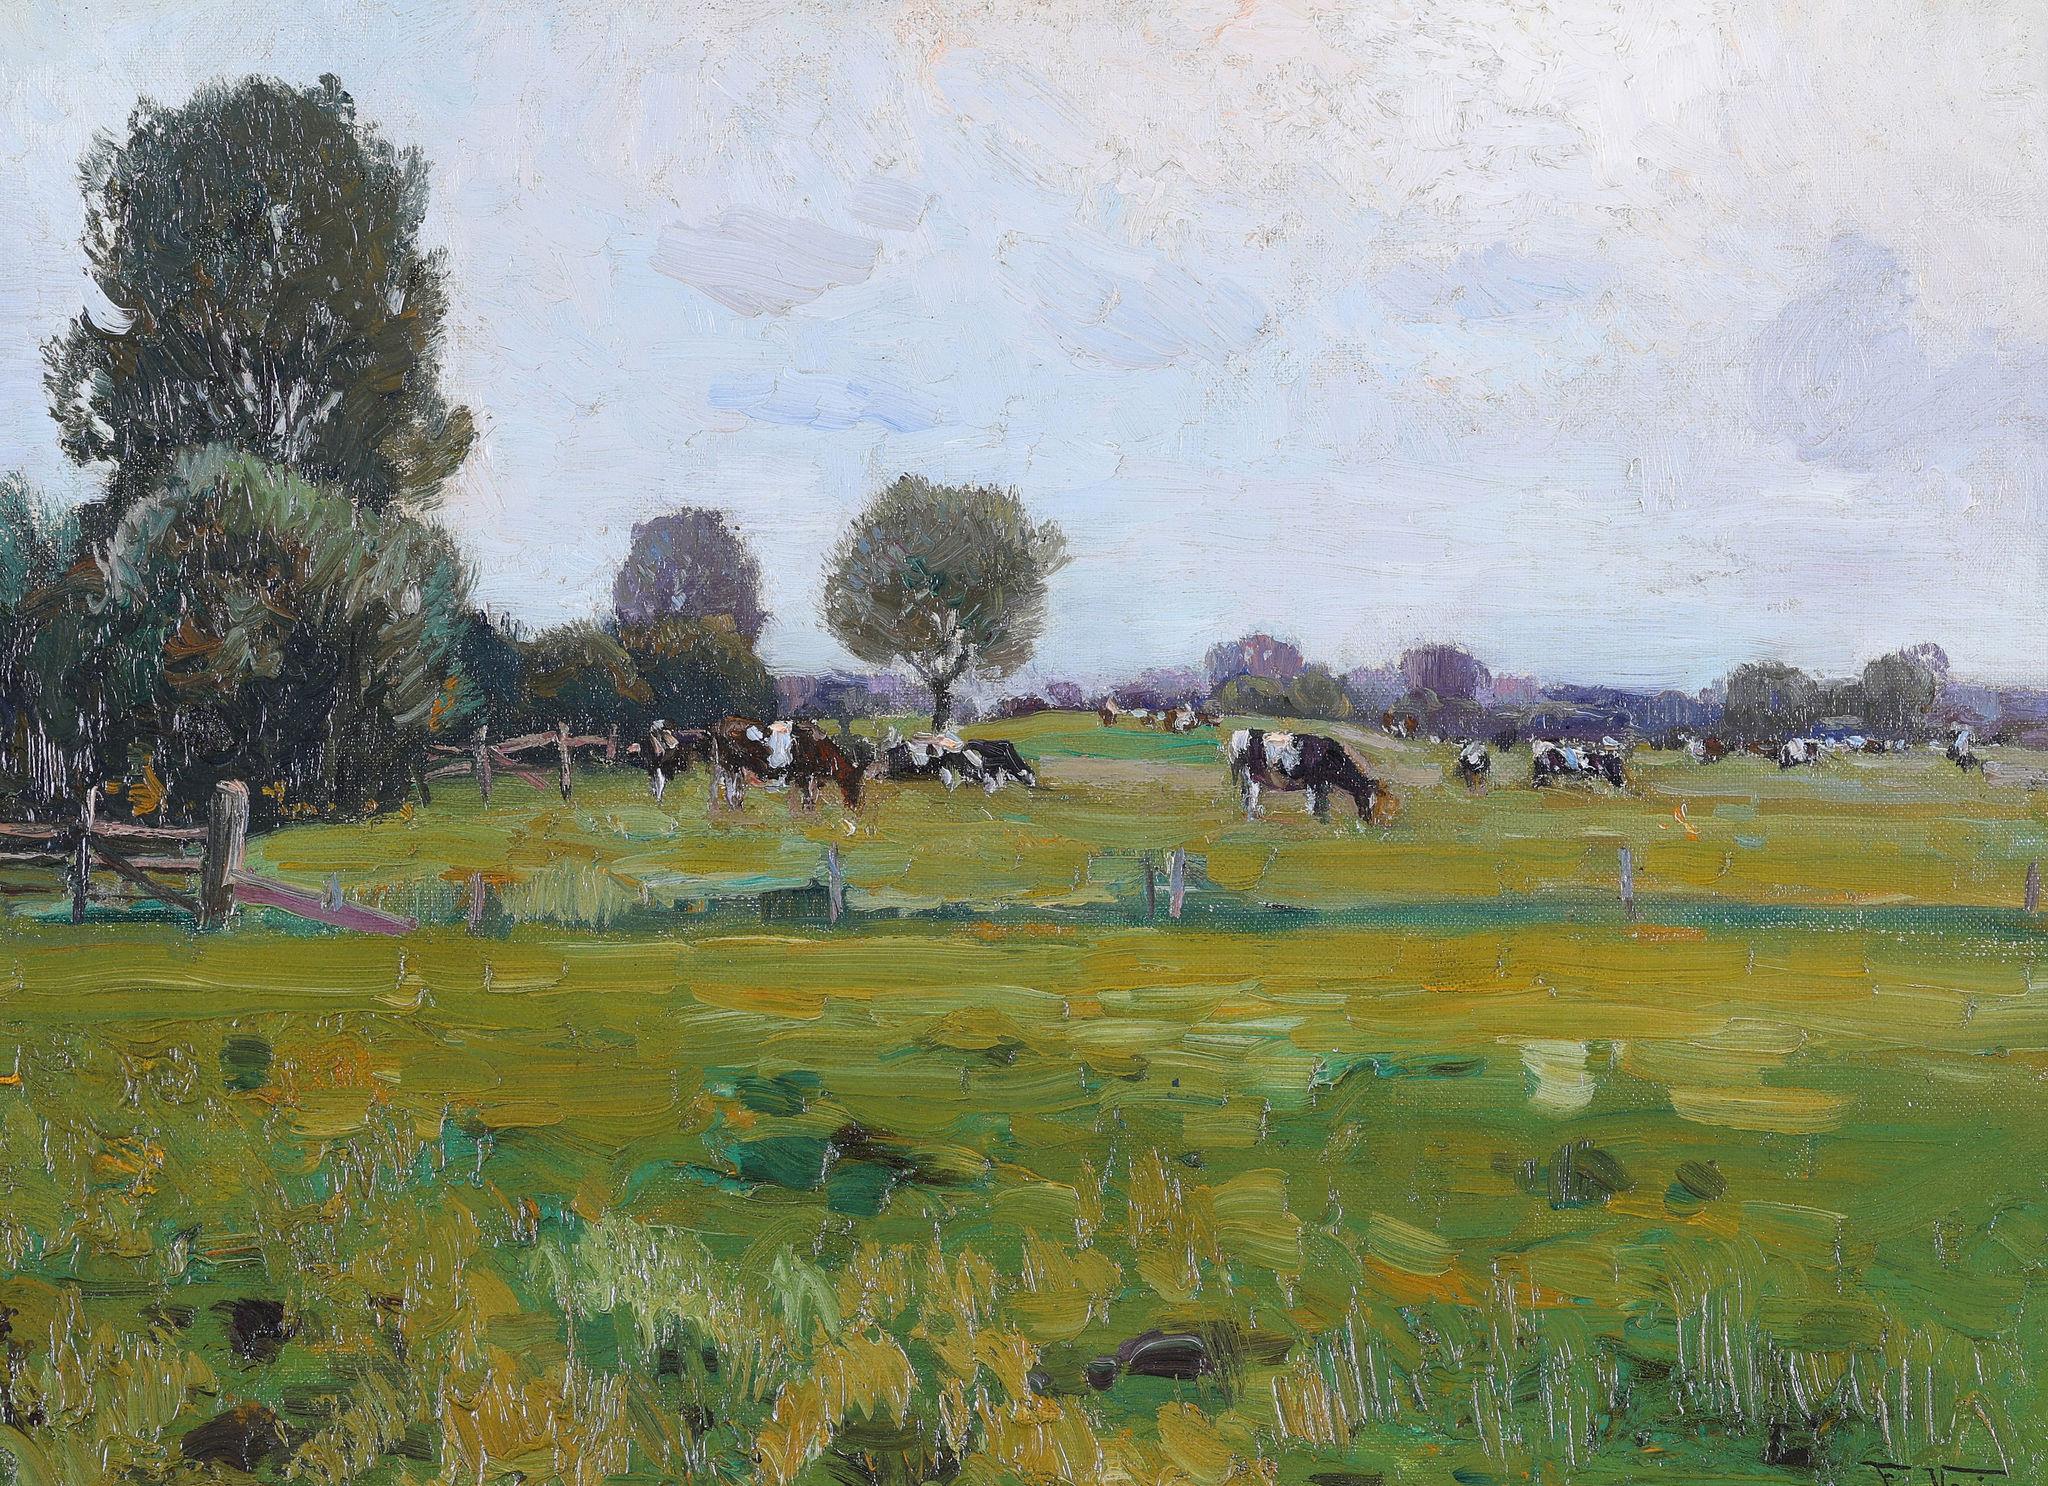 Cattle Grazing in a Landscape. Oil on Canvas - Painting by Frederick Vezin